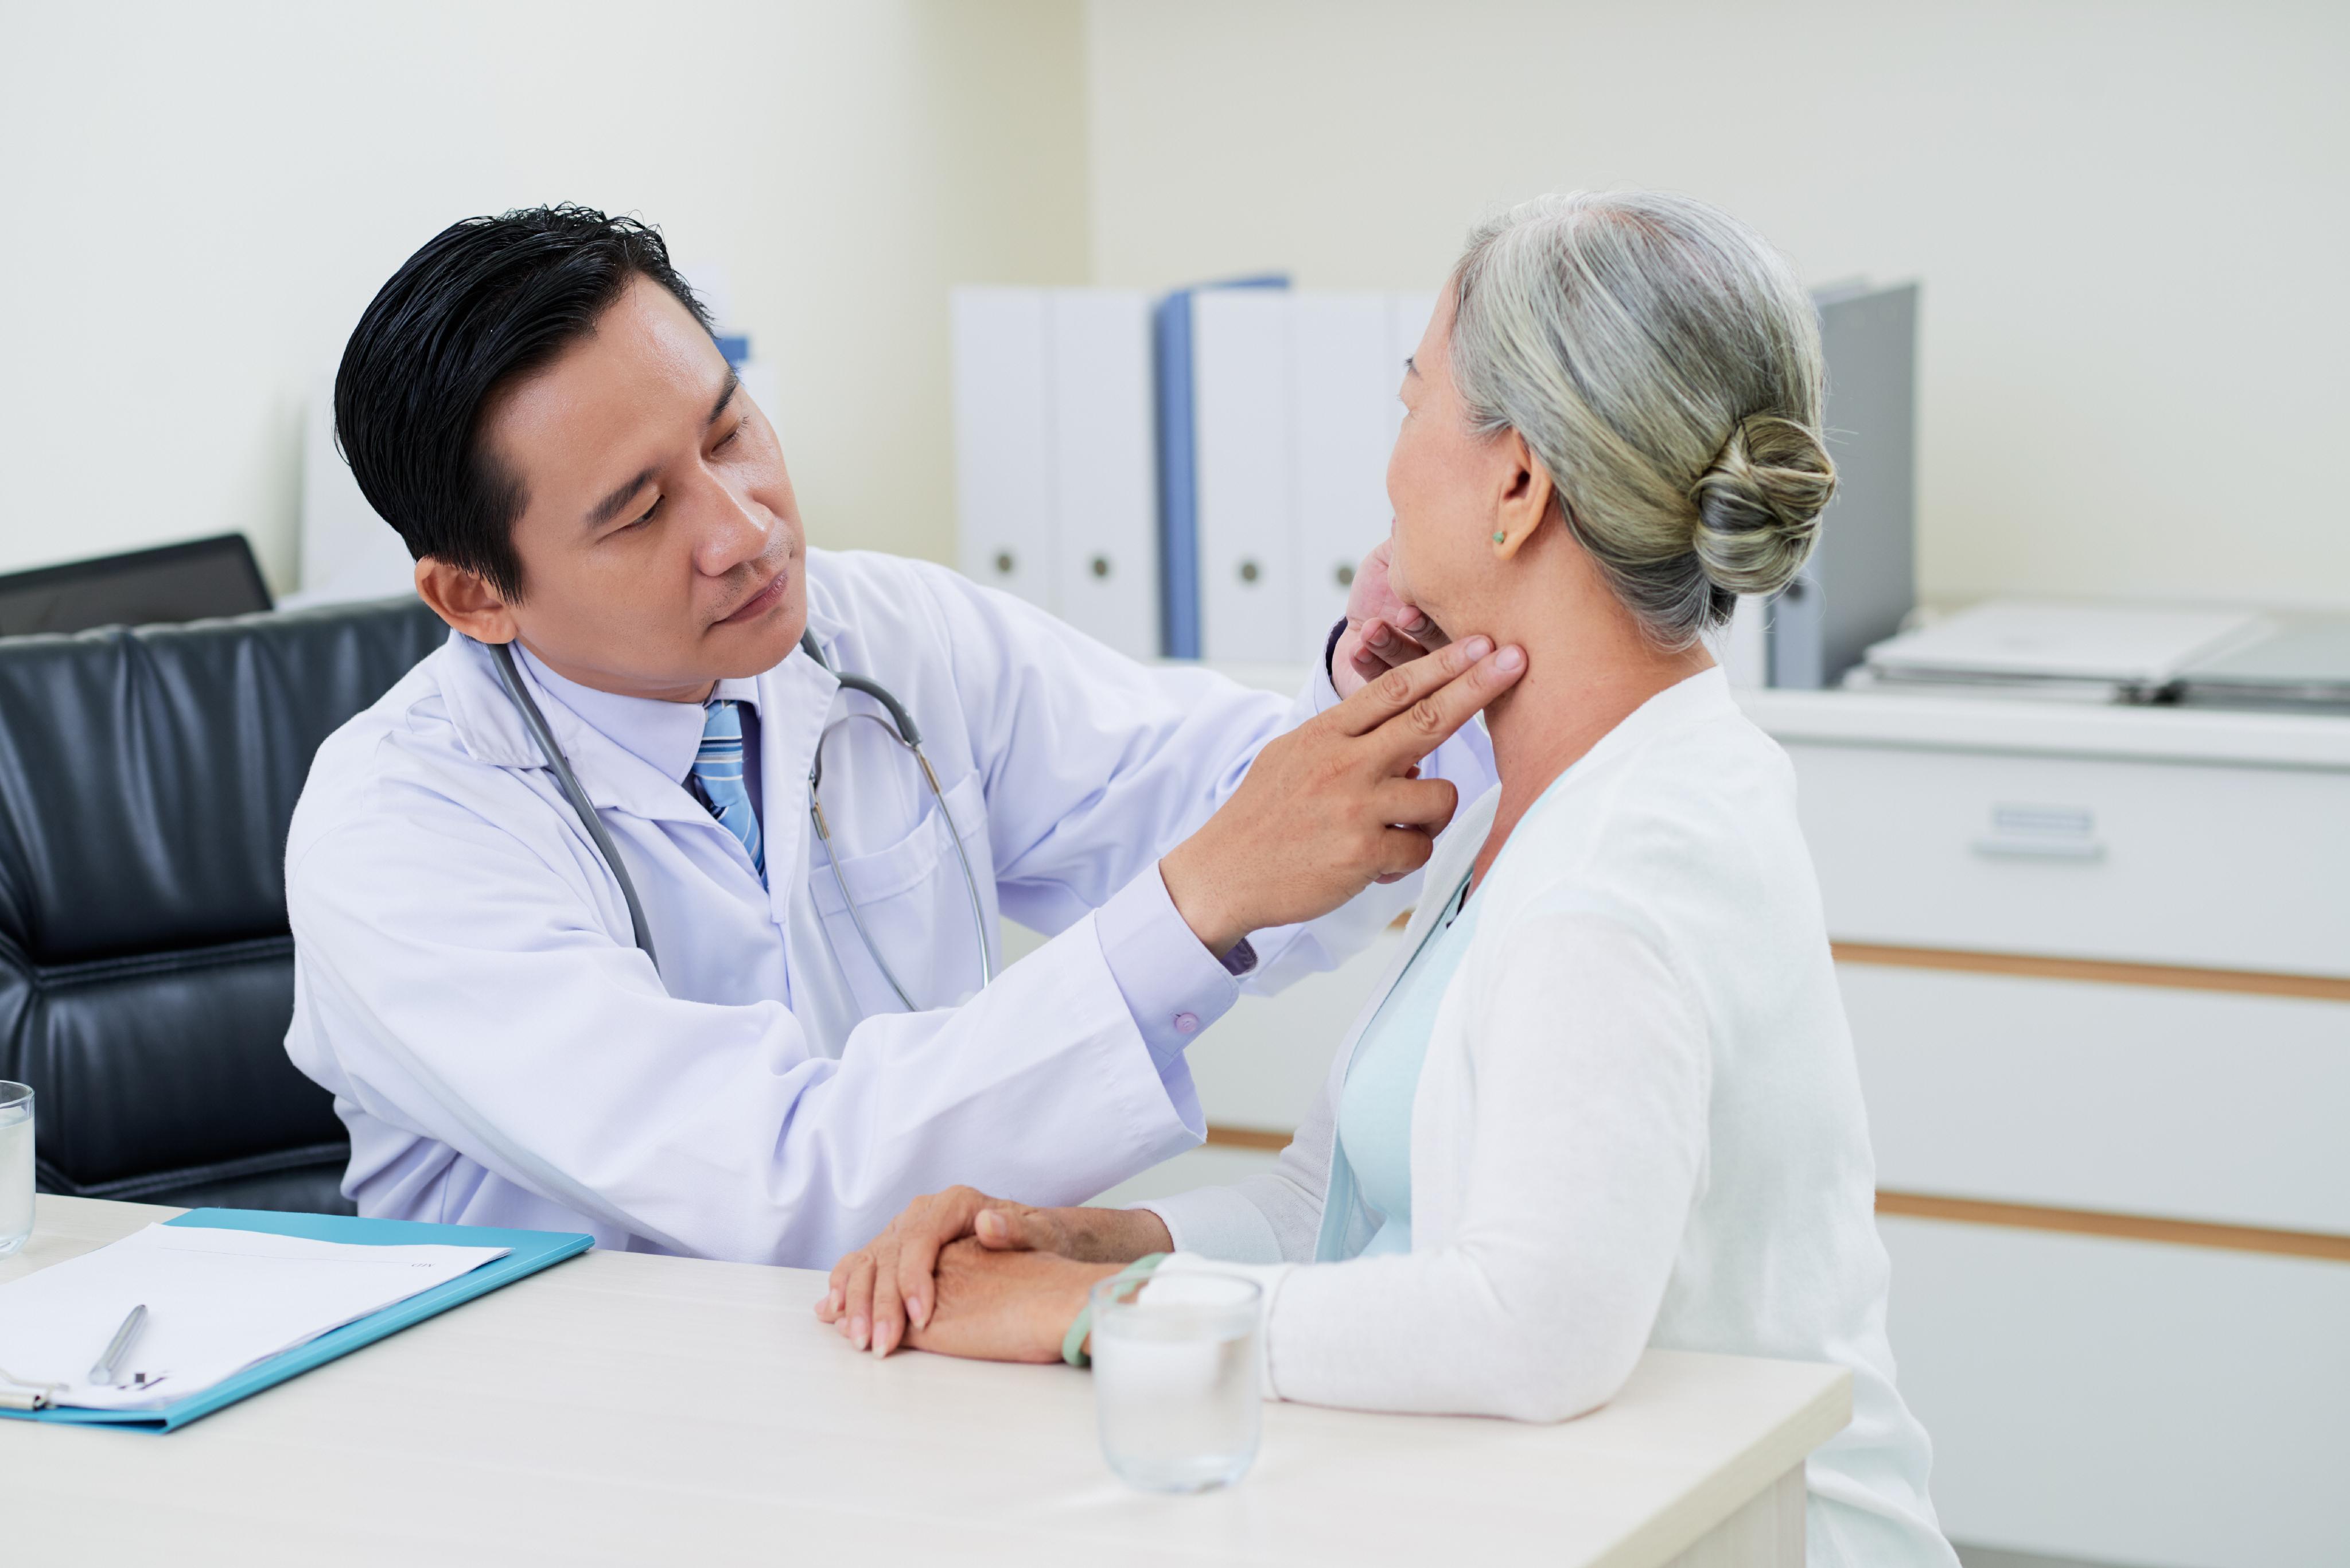 What are the Symptoms of Underactive Thyroid and the Treatment for Underactive Thyroid?